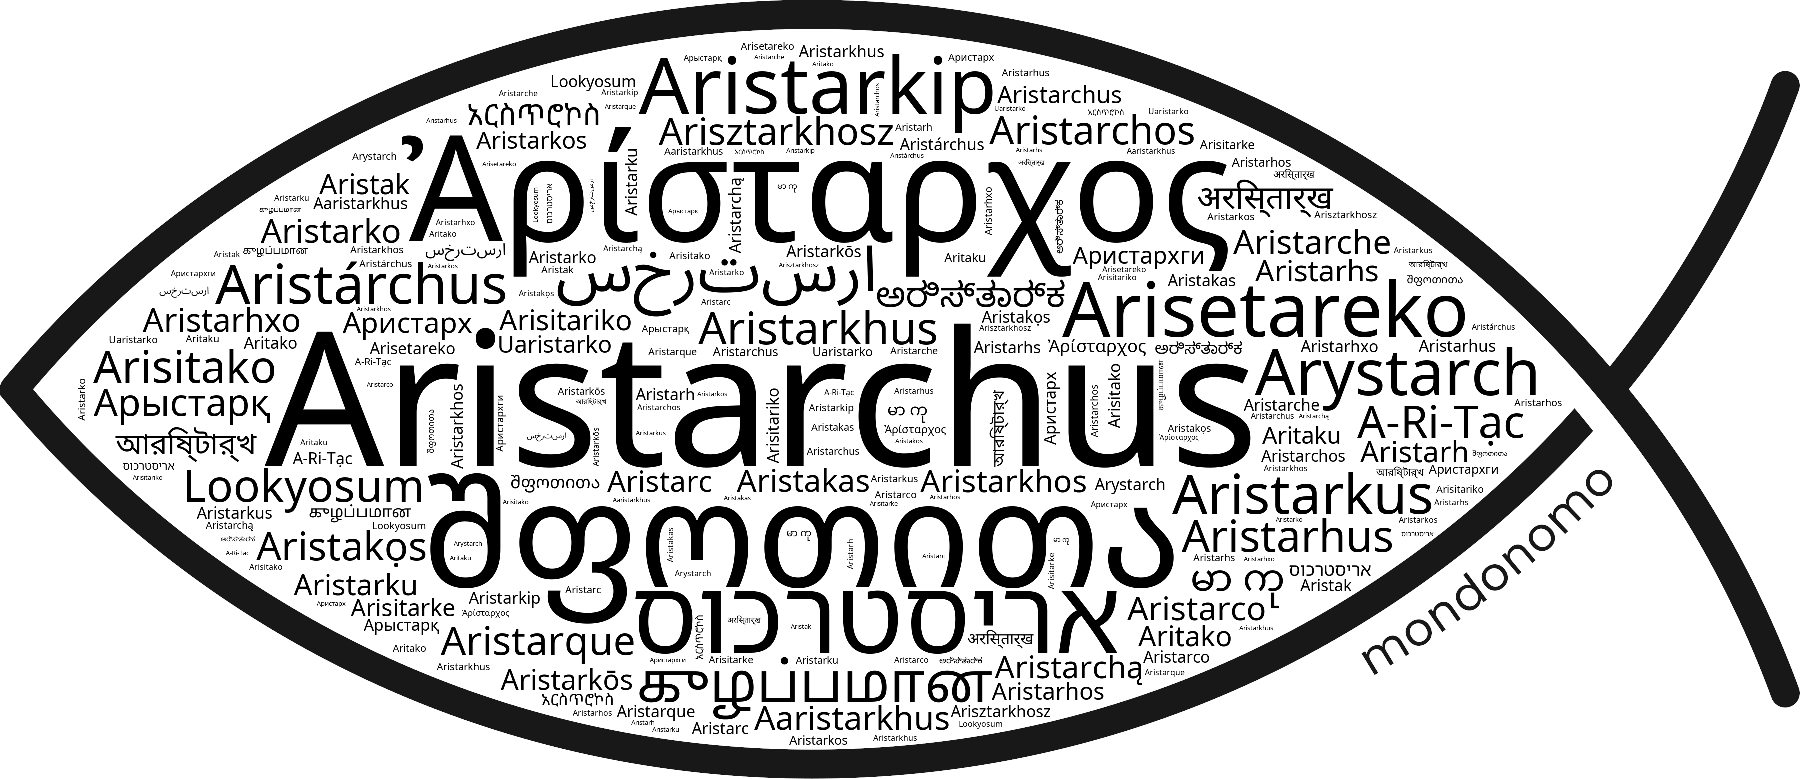 Name Aristarchus in the world's Bibles